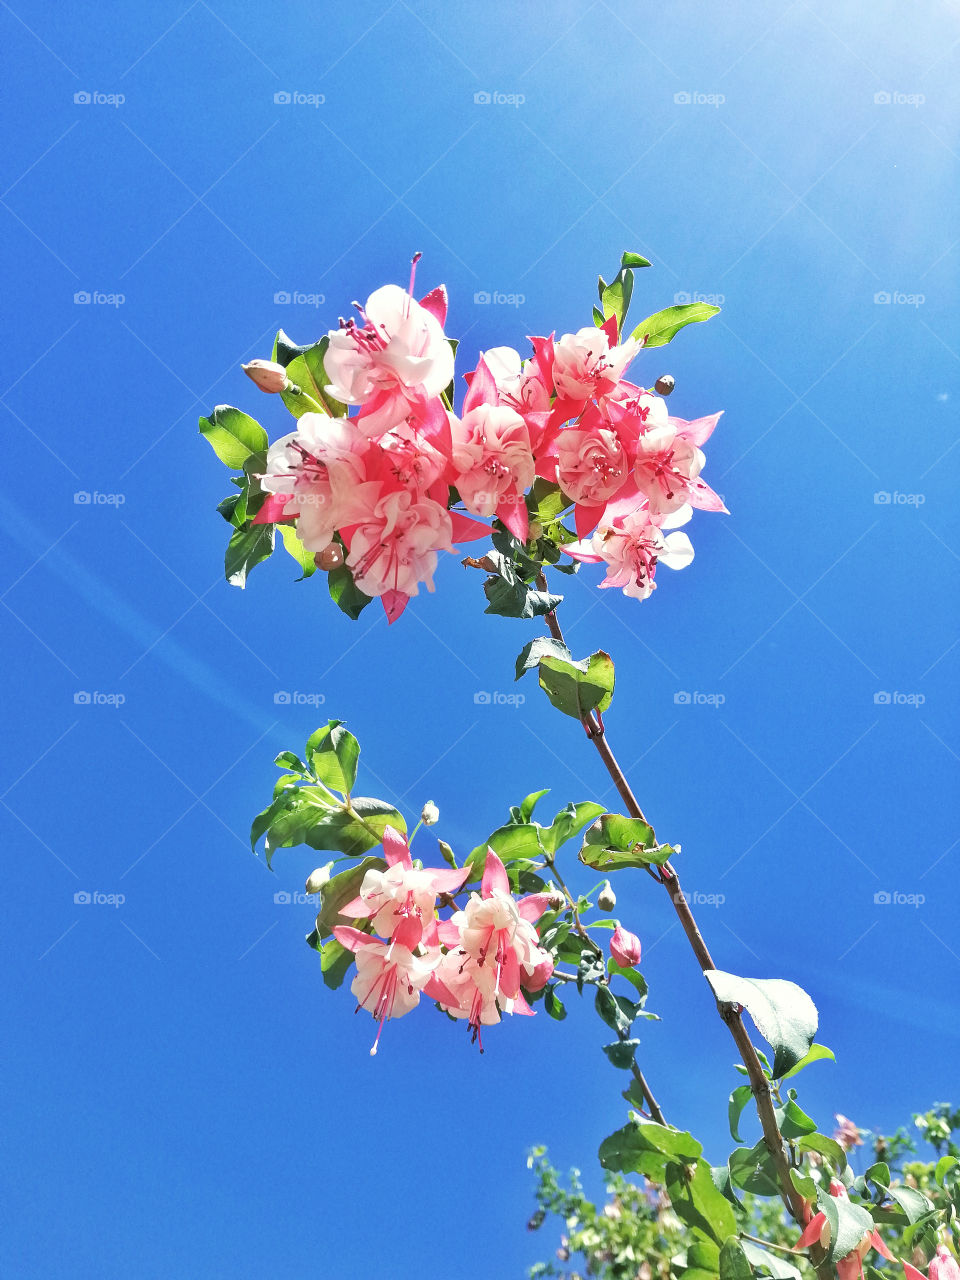 Pink flowers against a bright blue sky